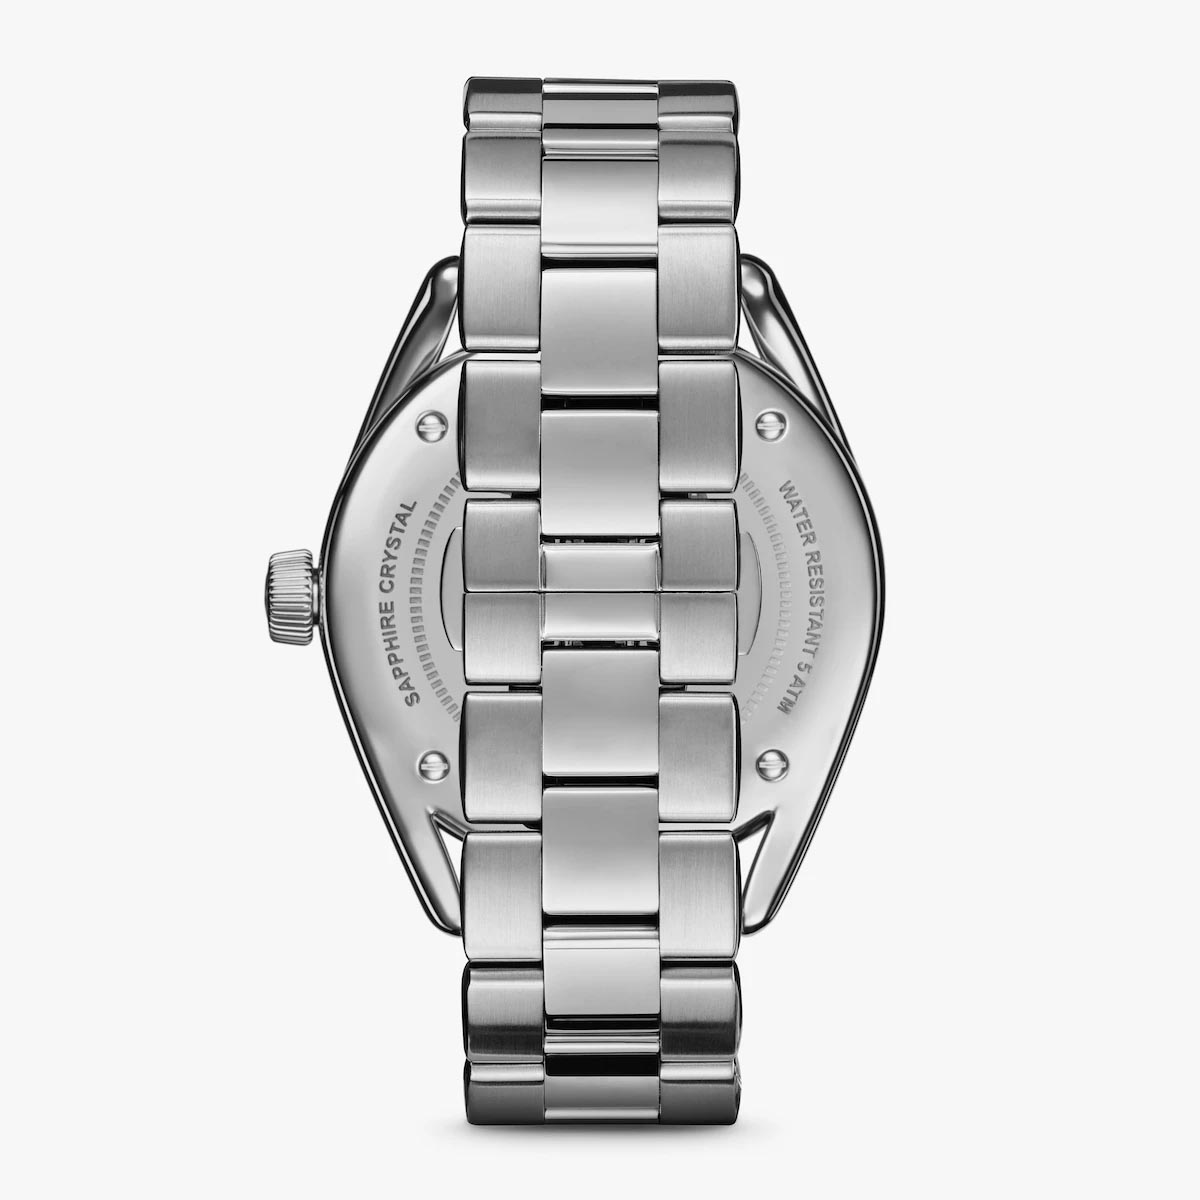 Shinola Derby 38mm Watch with Green Dial and Stainless Steel Bracelet (quartz movement)